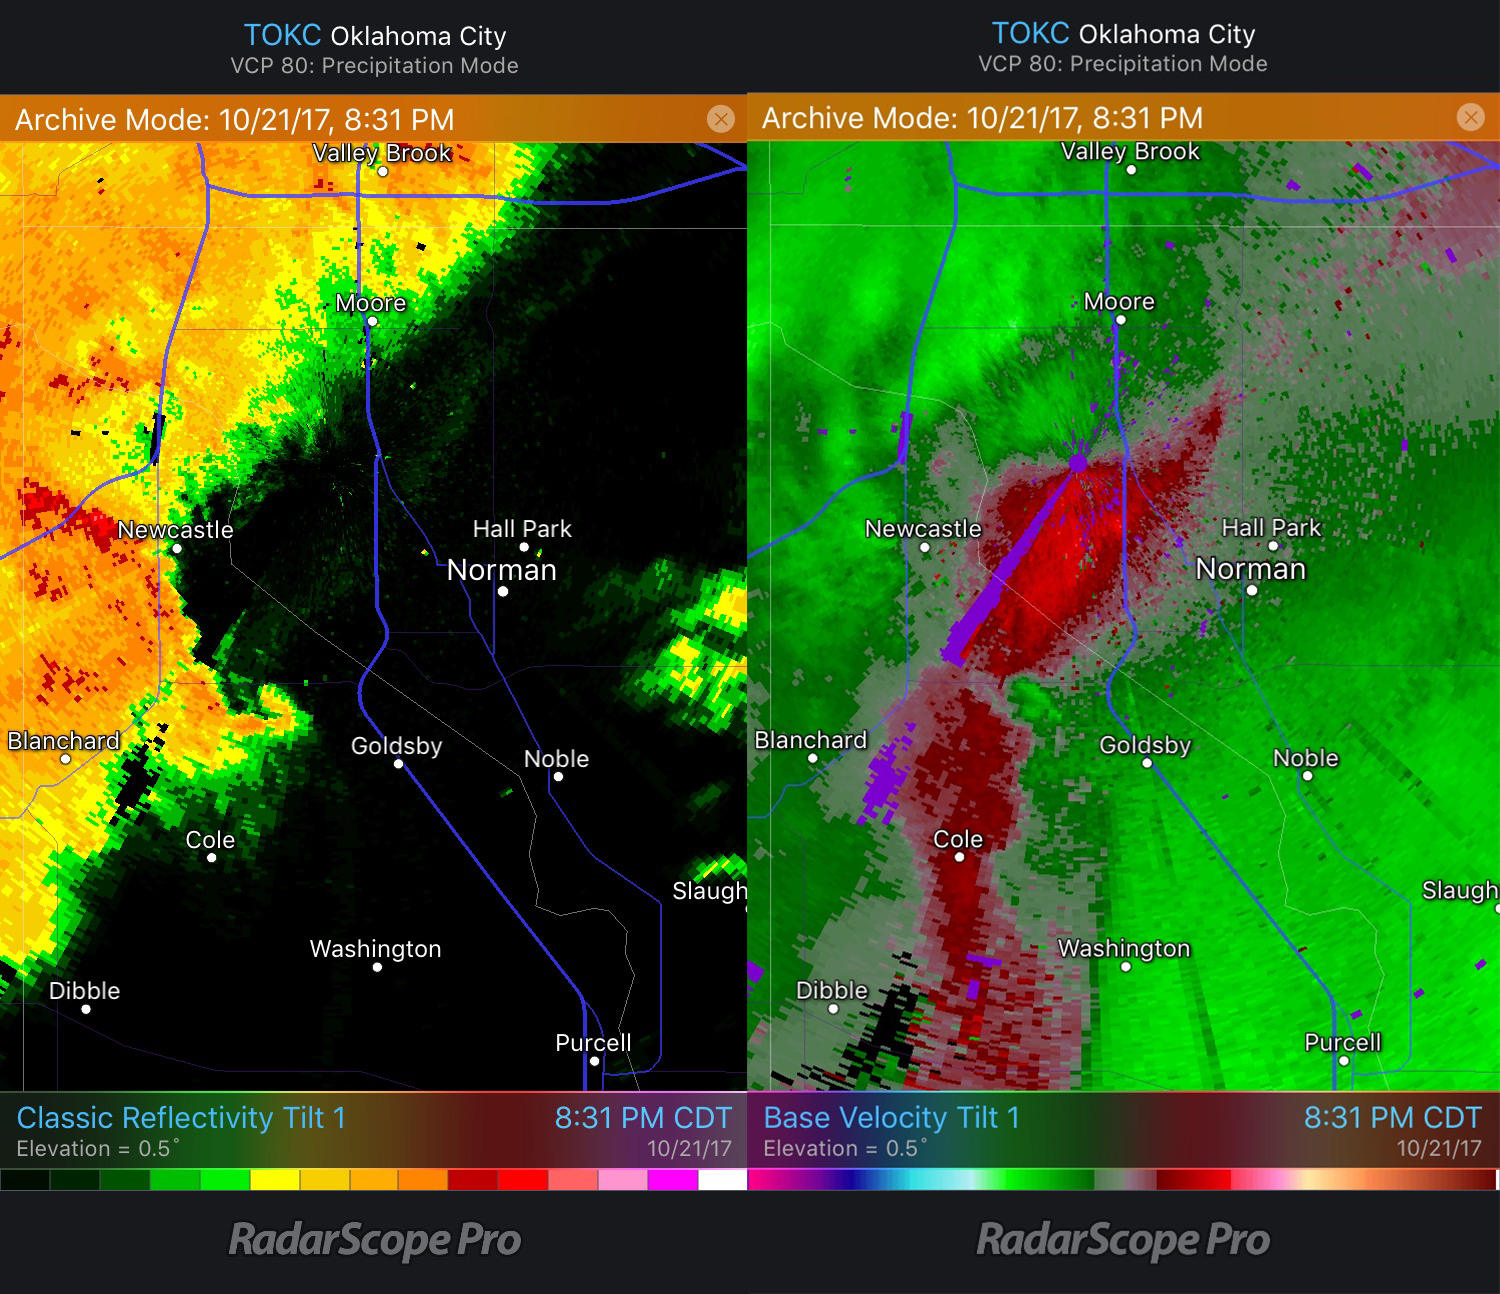 Goldsby Tornado Reflectivity and Velocity images from TOKC